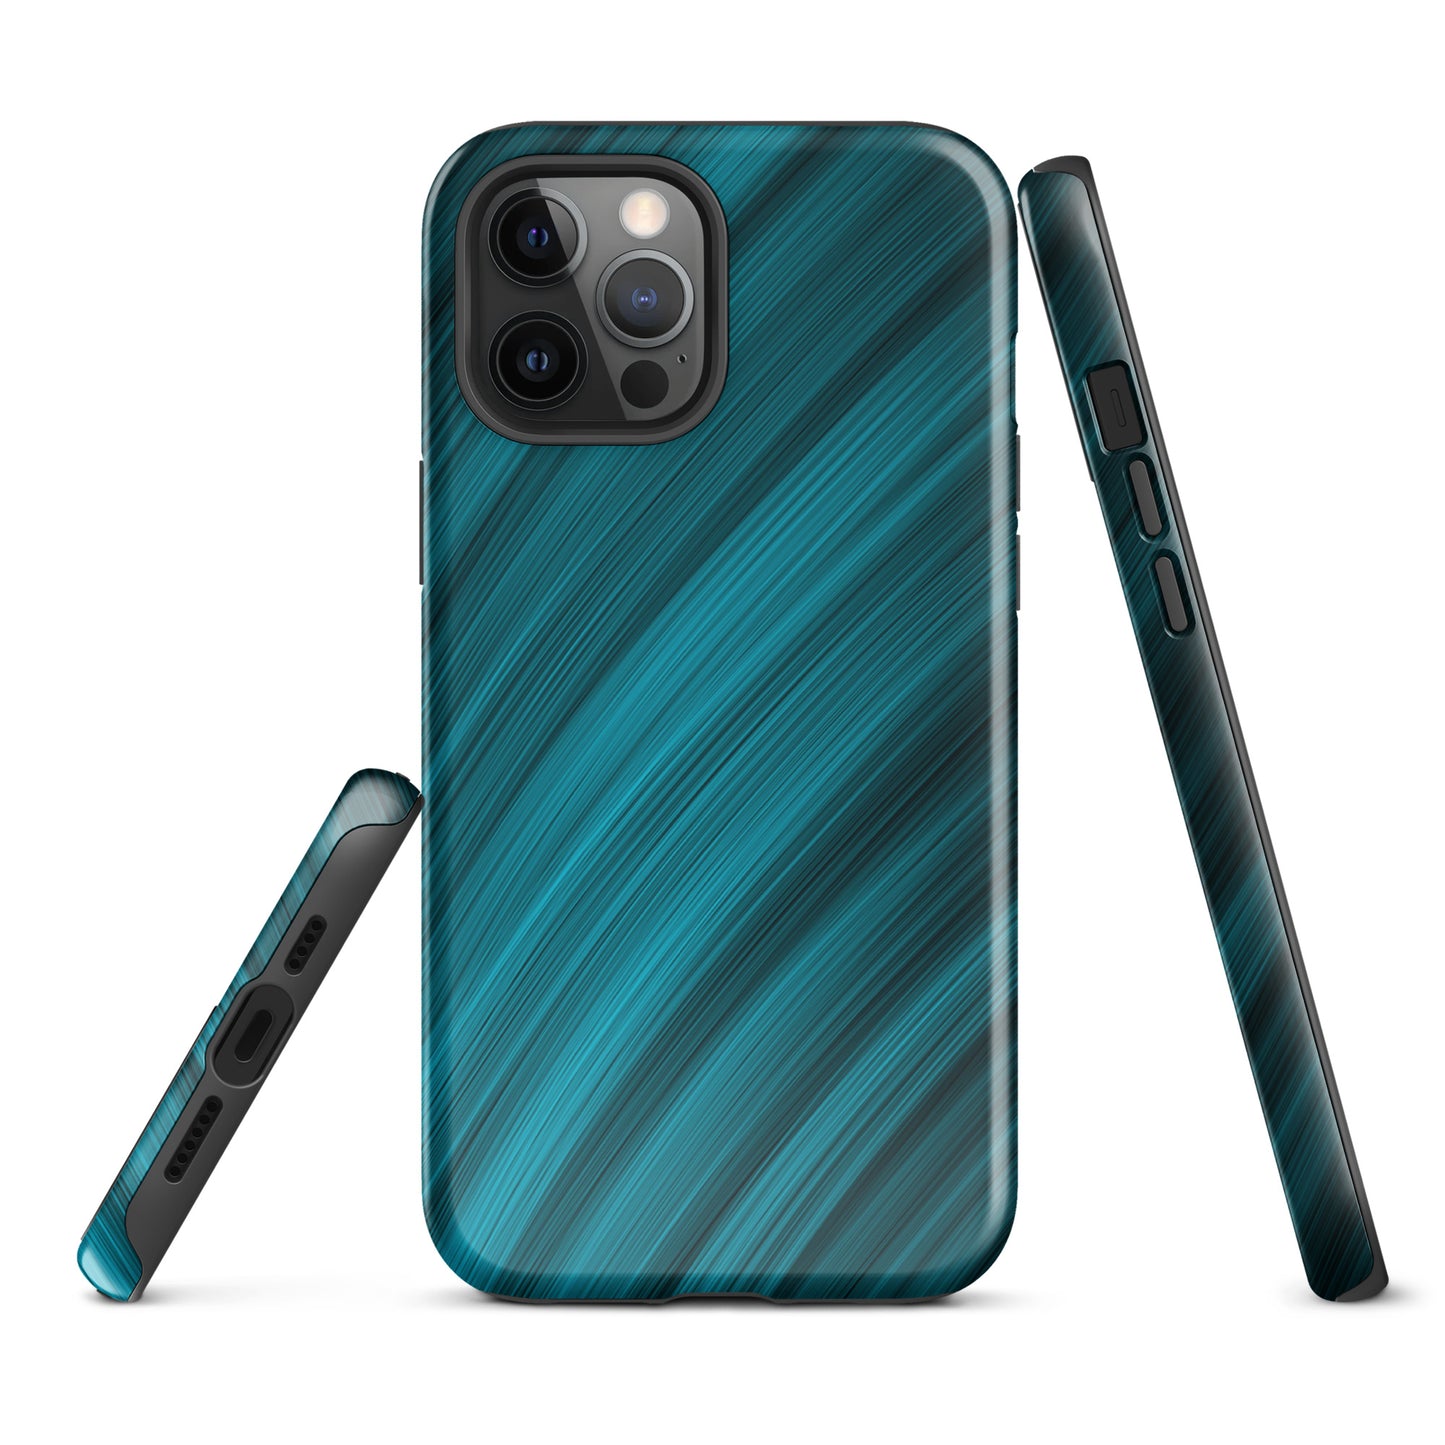 A Light Blue Brush Strokes Case for the iPhone 12 Pro Max